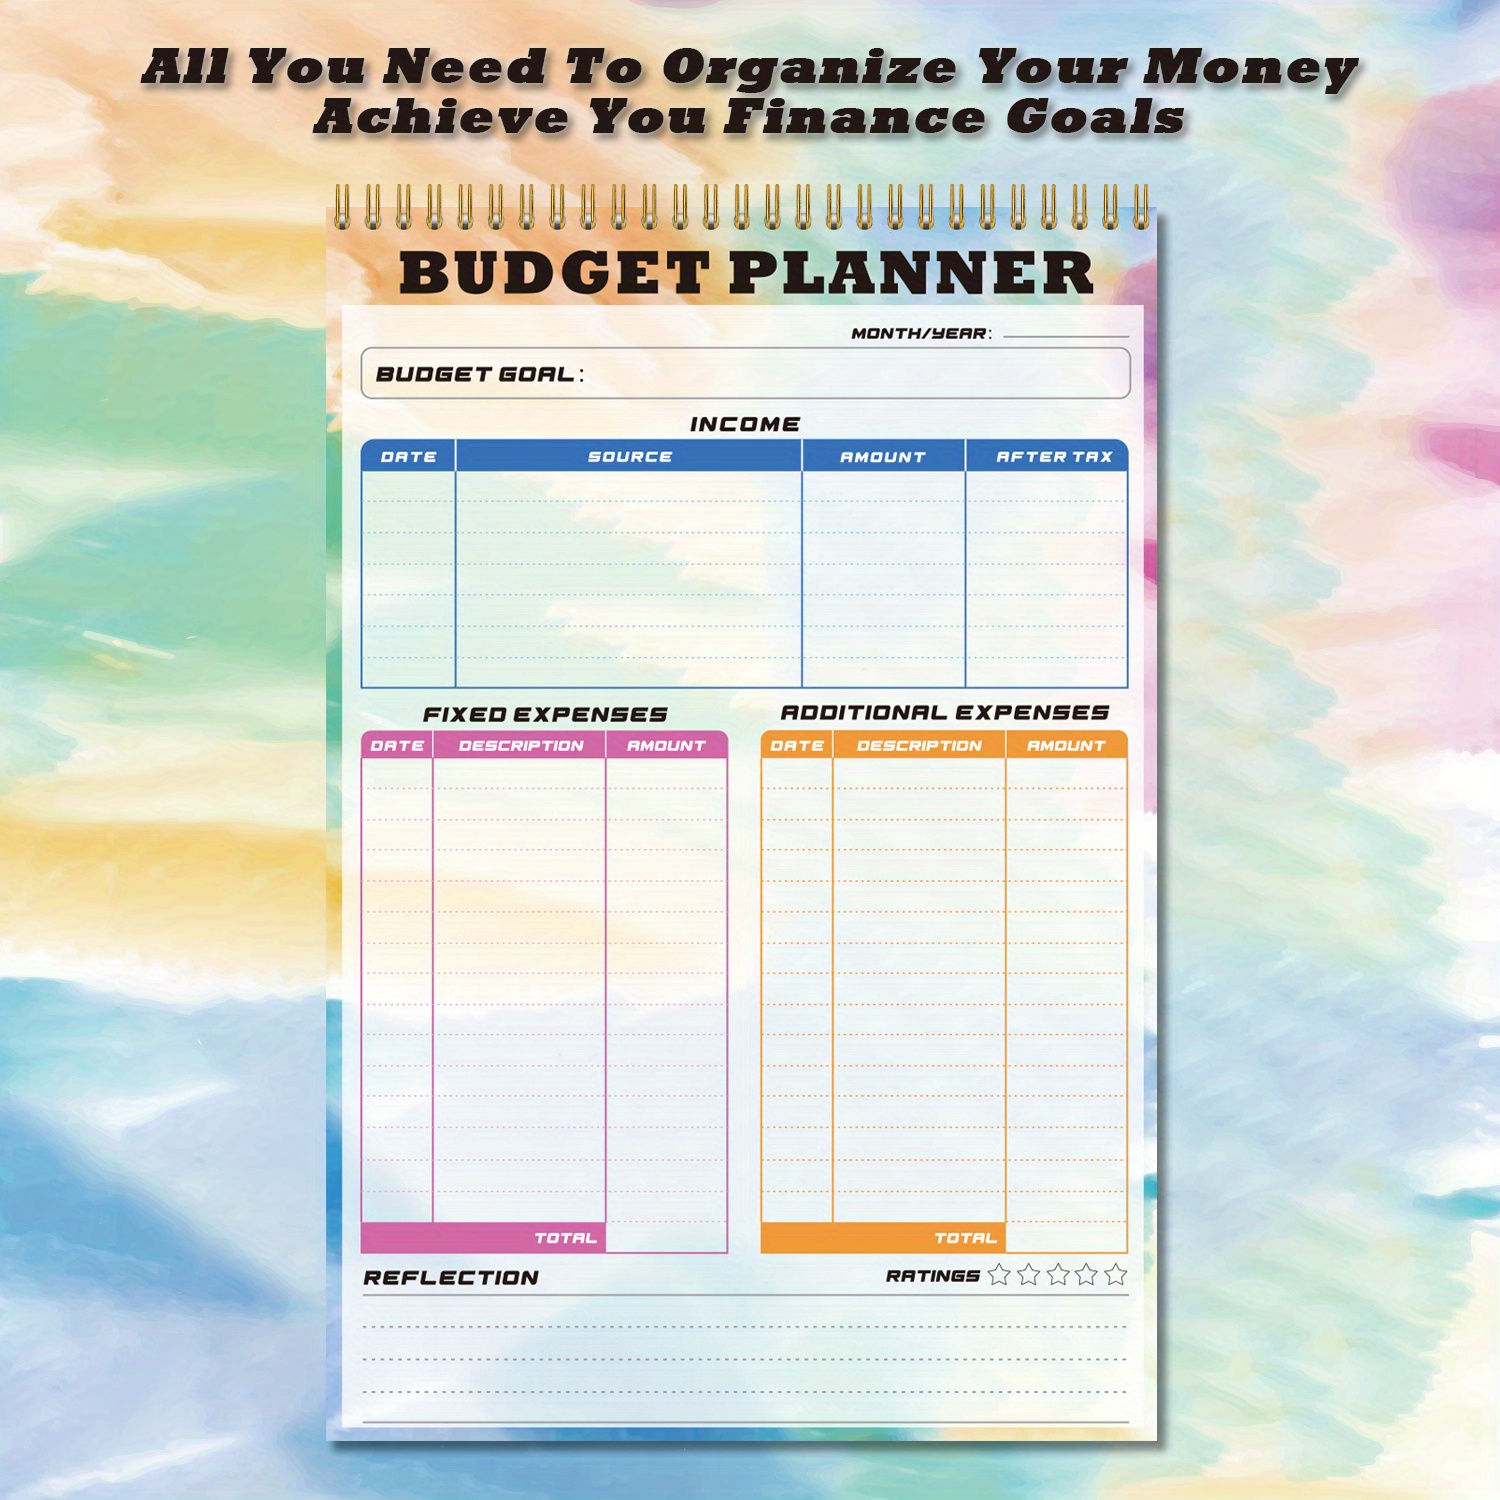 Yearly Financial Planner • The Printables